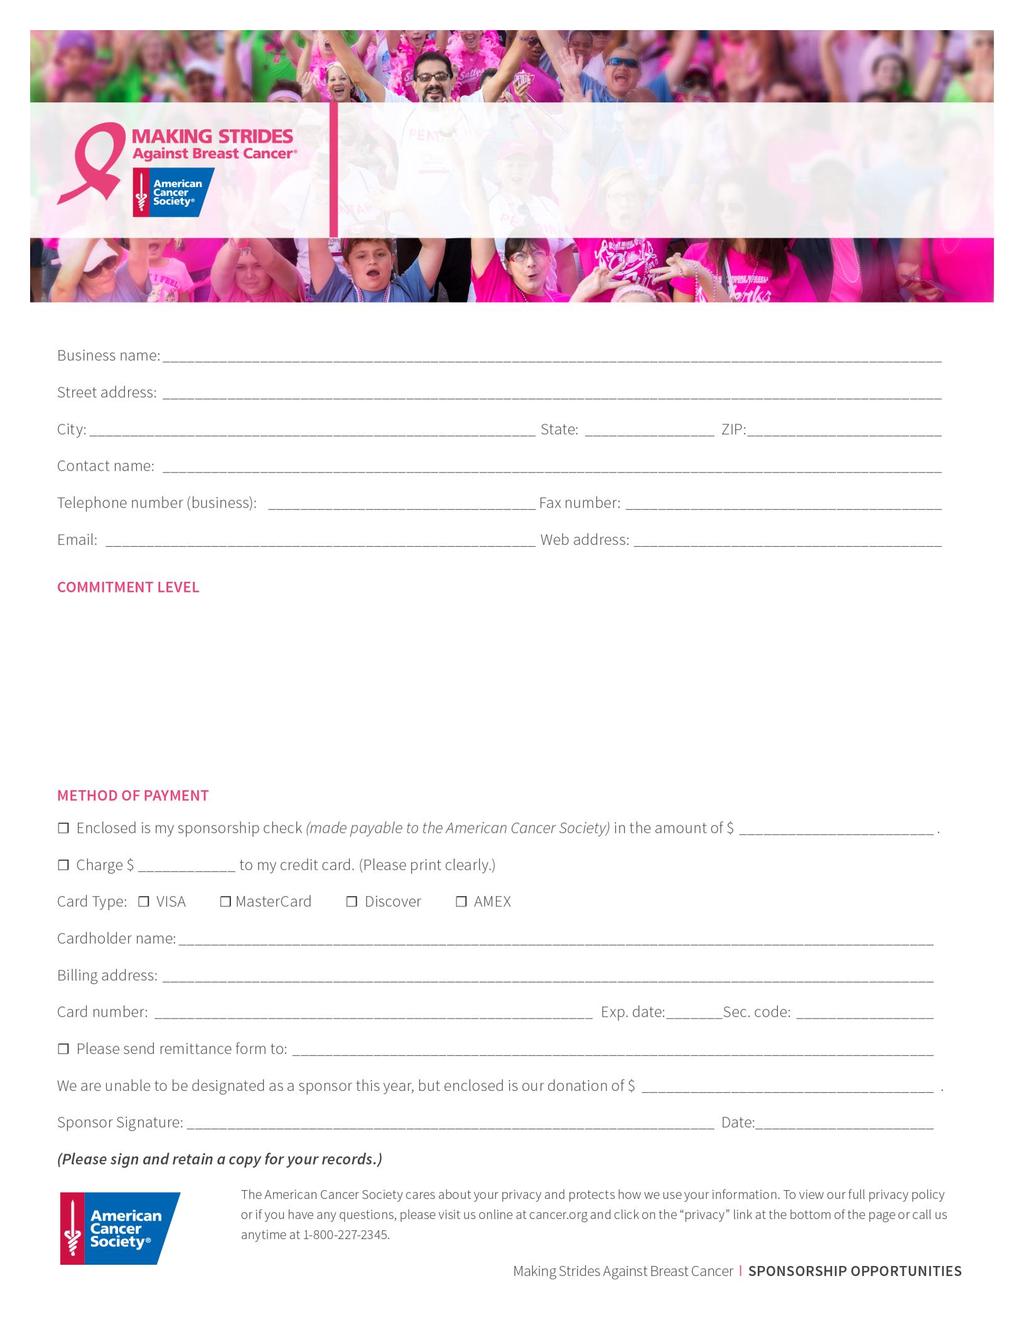 Making Strides Against Breast Cancer of [insert community name] SPONSORSHIP COMMITMENT FORM $7,500 Flagship $2,000 Silver $2,000 Start Line $500 Water Stop $5,000 Platinum